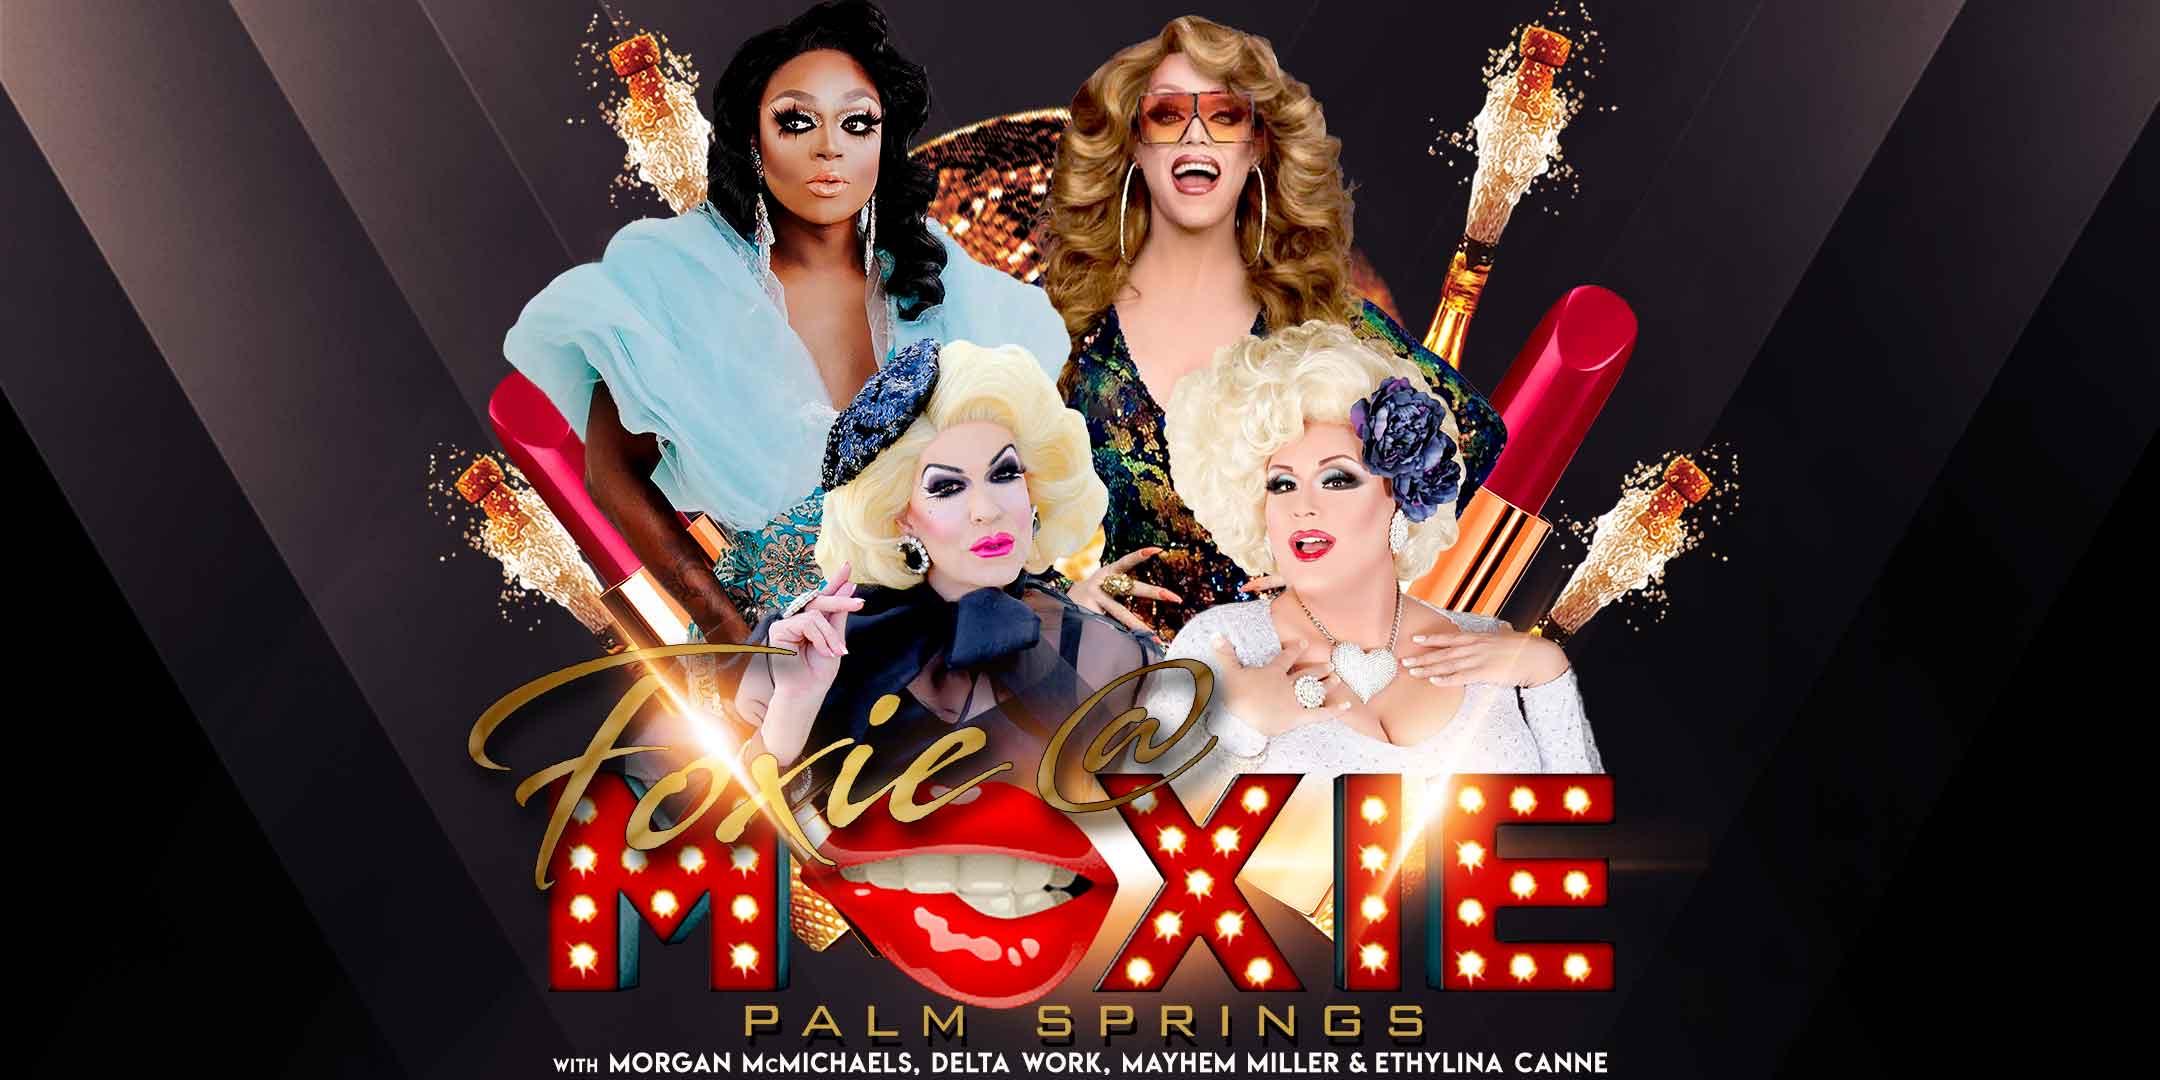 Morgan McMichaels, Delta Work & Ethylina Canne present Foxie @ Moxie with special Guests: Mariah Balenciaga & Aurora Sexton